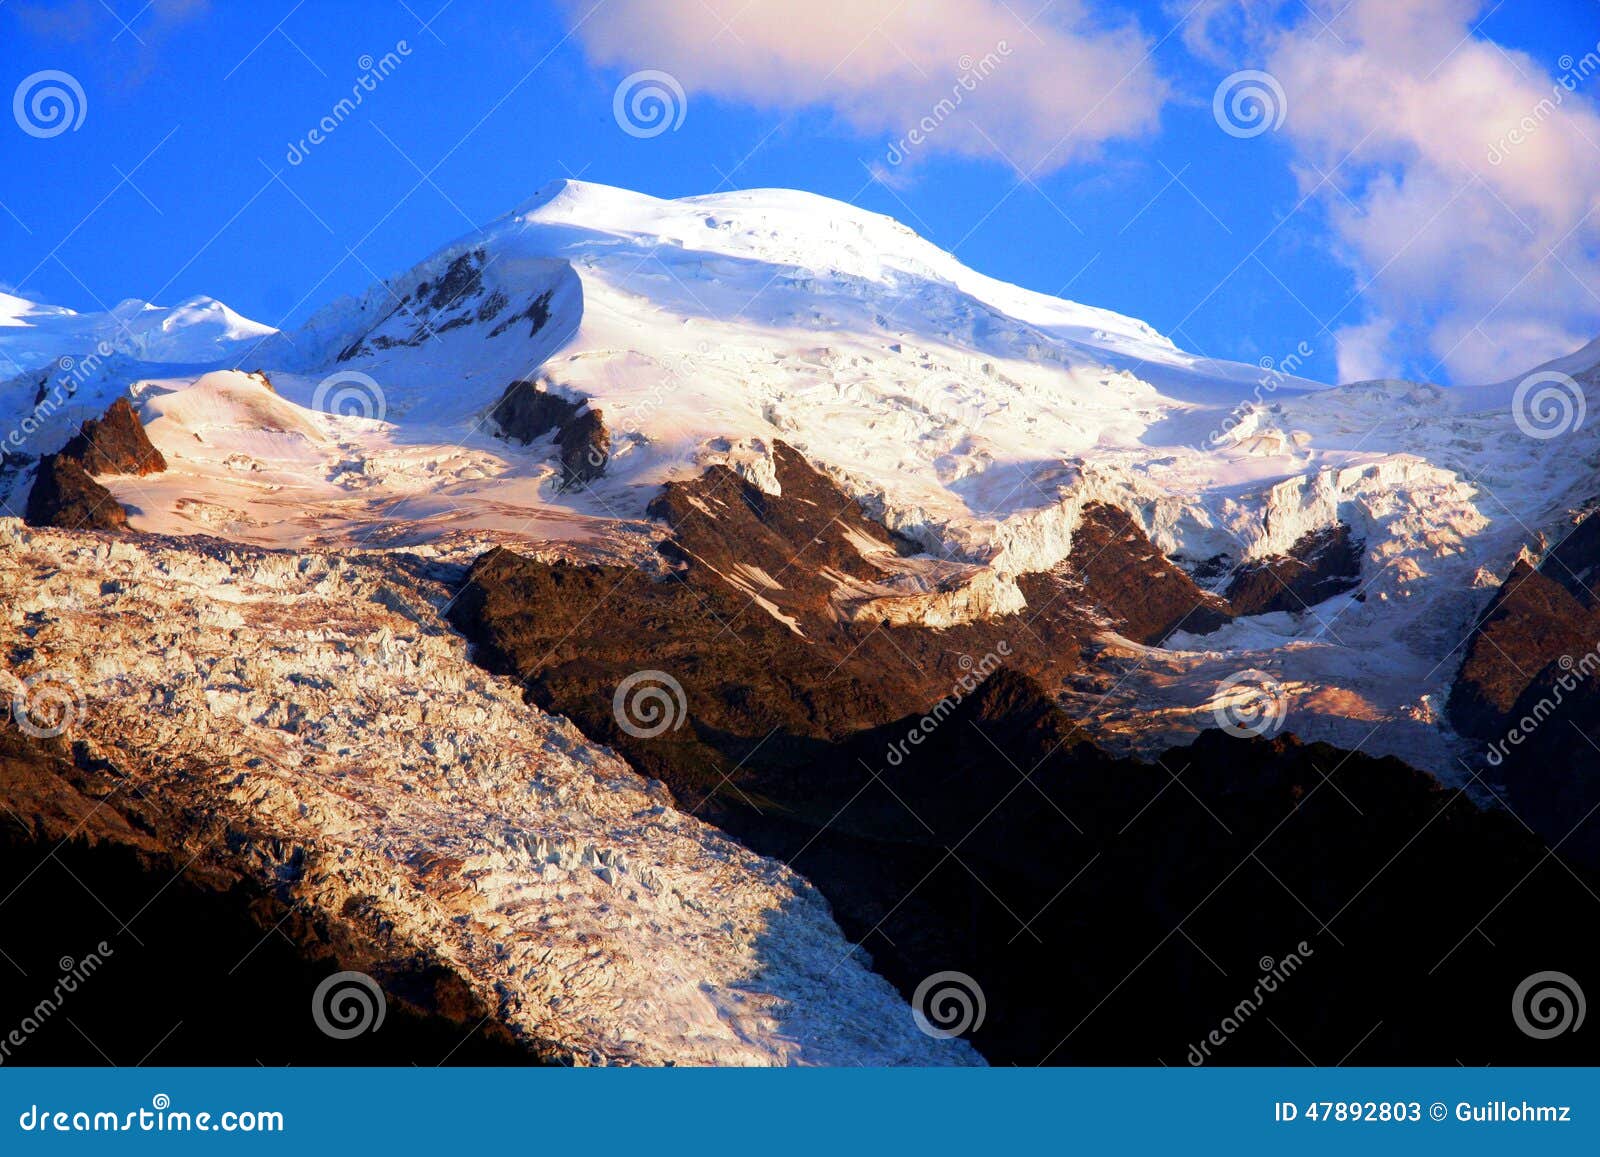 Stock Photo: MONT-BLANC - French Alps